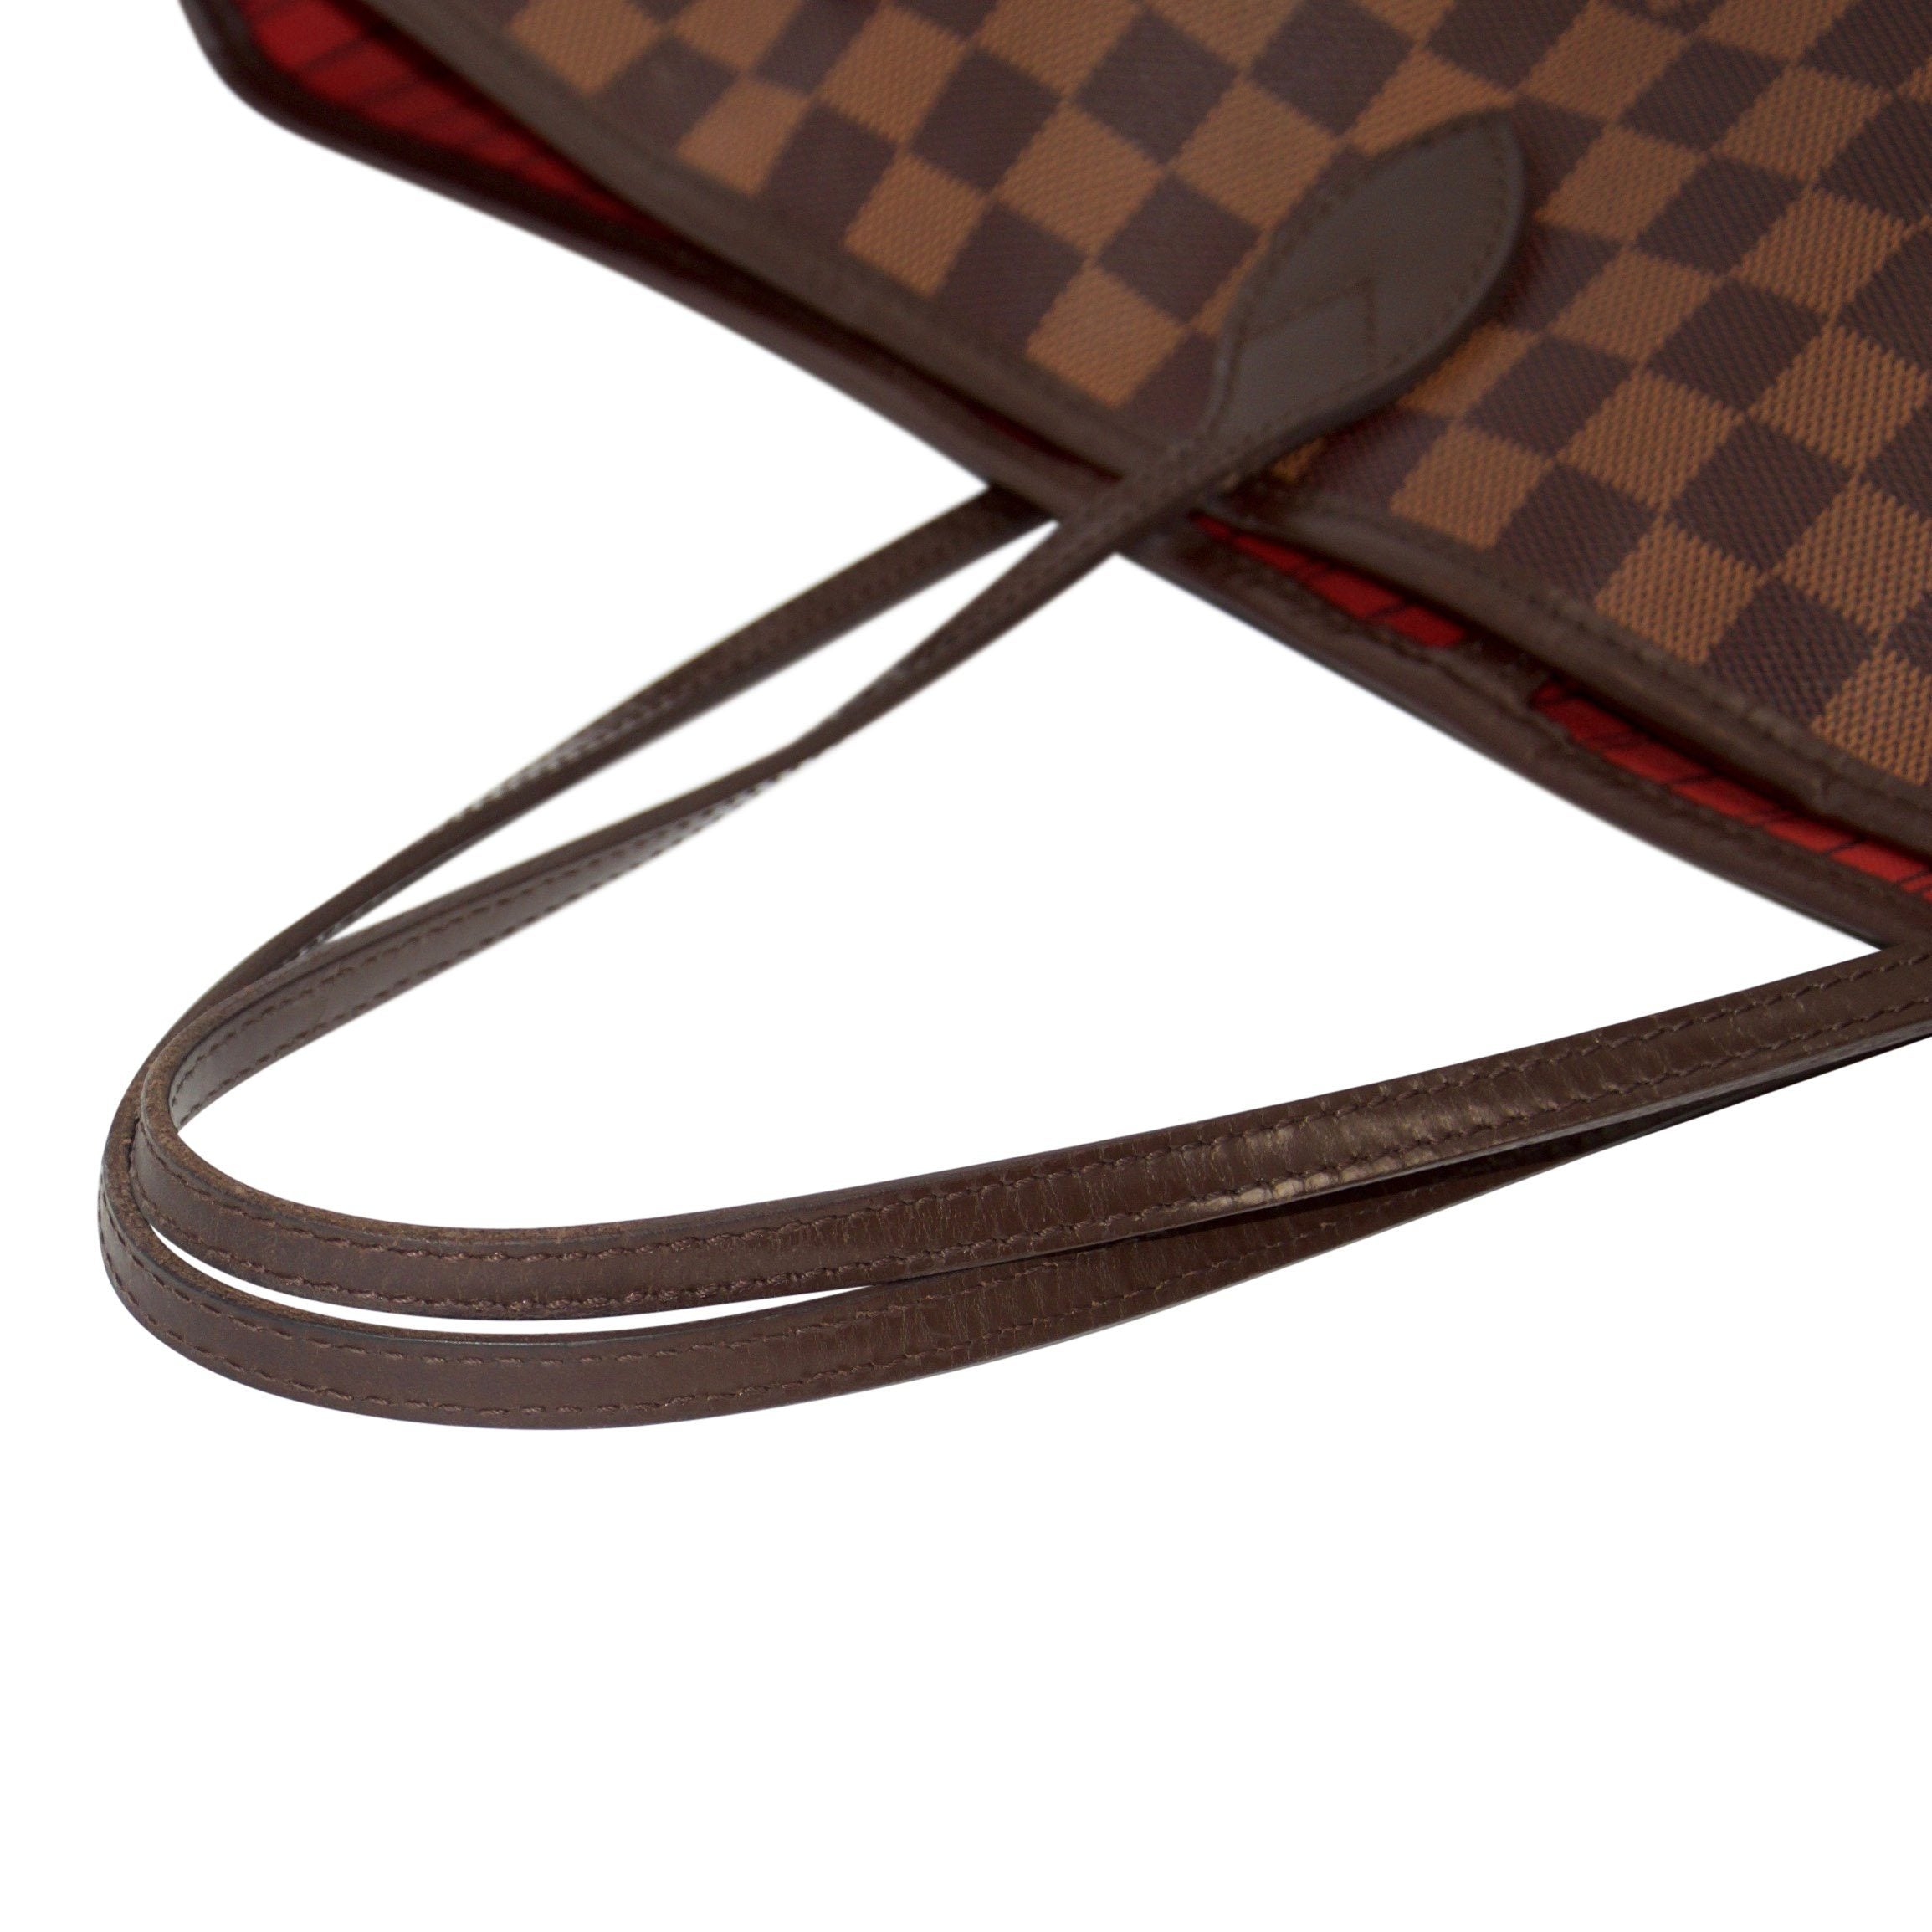 Louis Vuitton Damier Ebene Neverfull GM with Pouch– Oliver Jewellery